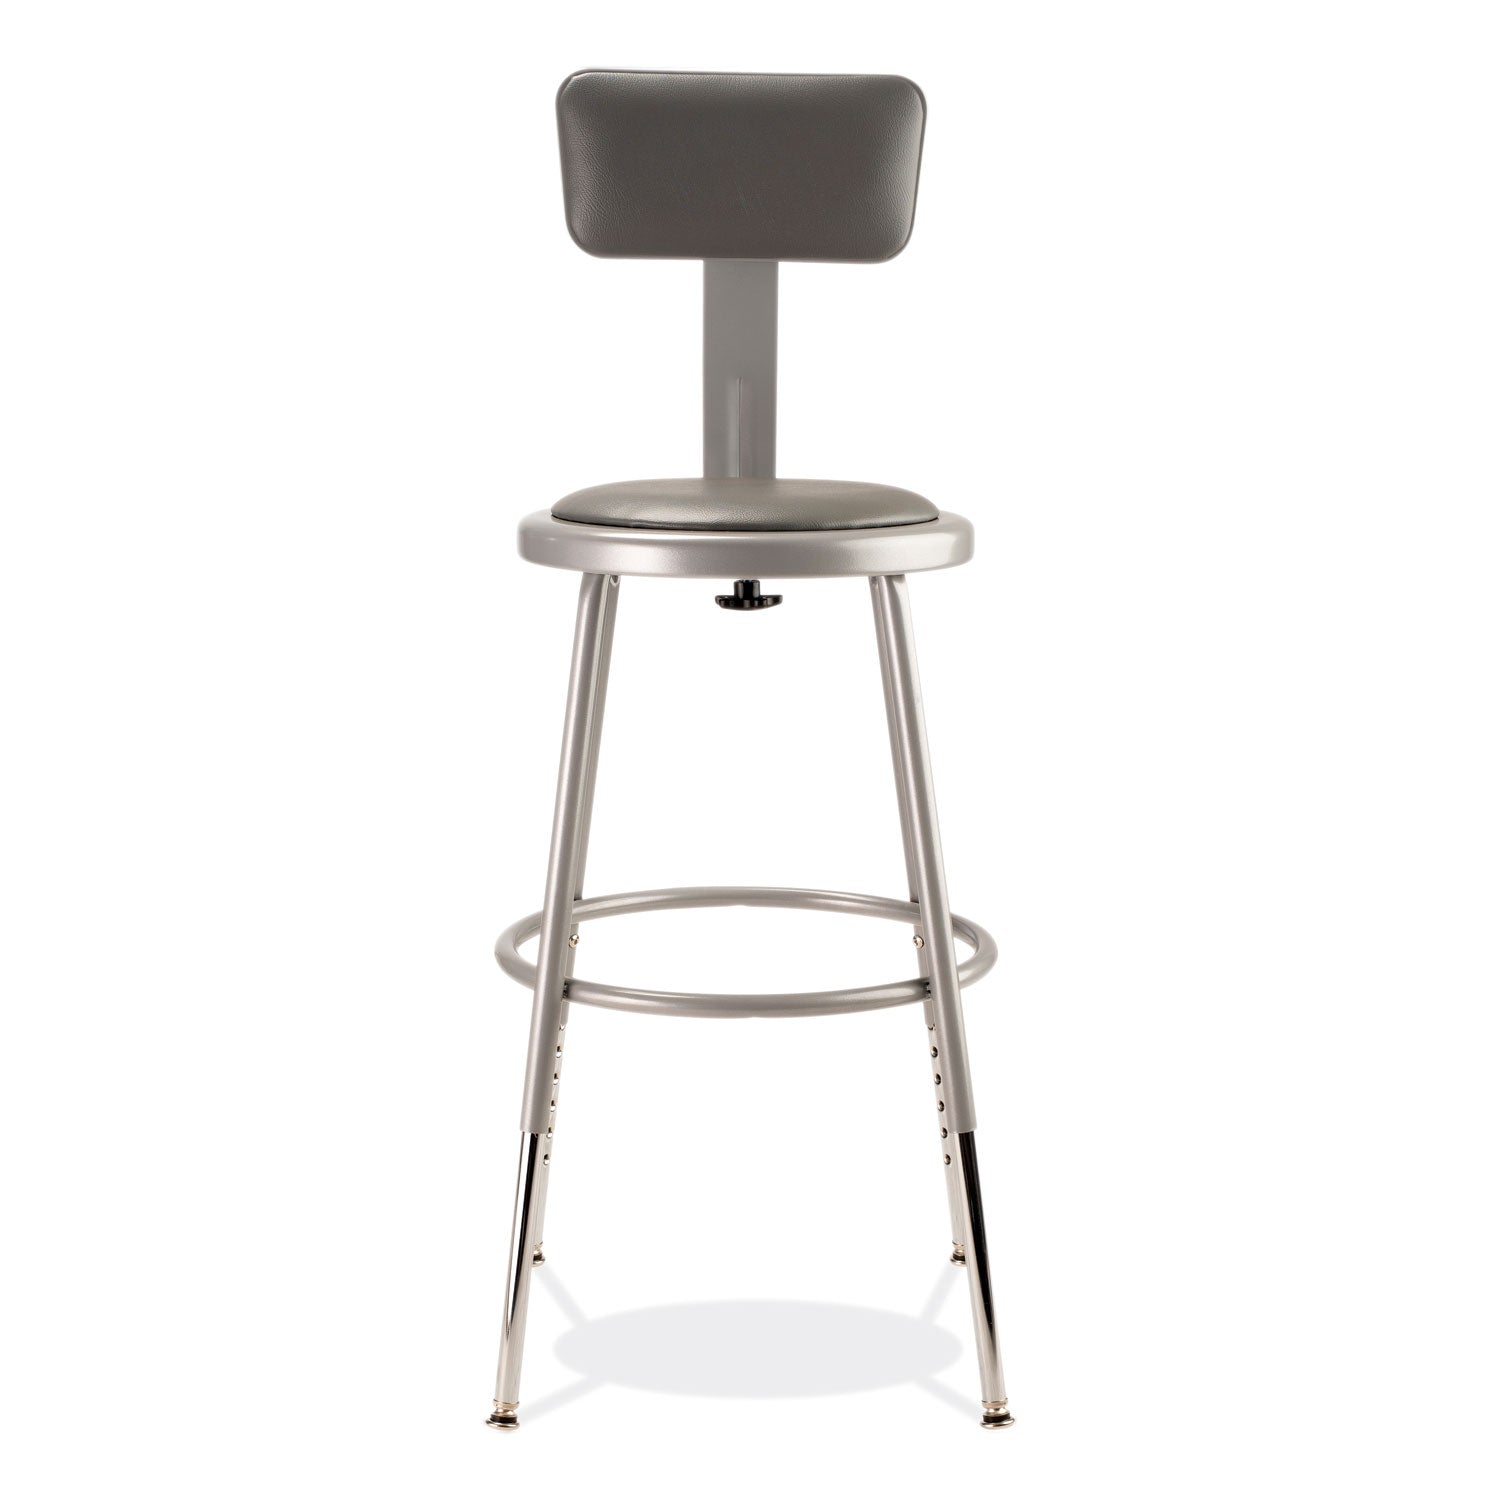 6400-series-height-adjustable-heavy-duty-padded-stool-w-backrest-supports-300lb-19-27-seat-ht-grayships-in-1-3-bus-days_nps6418hb - 4